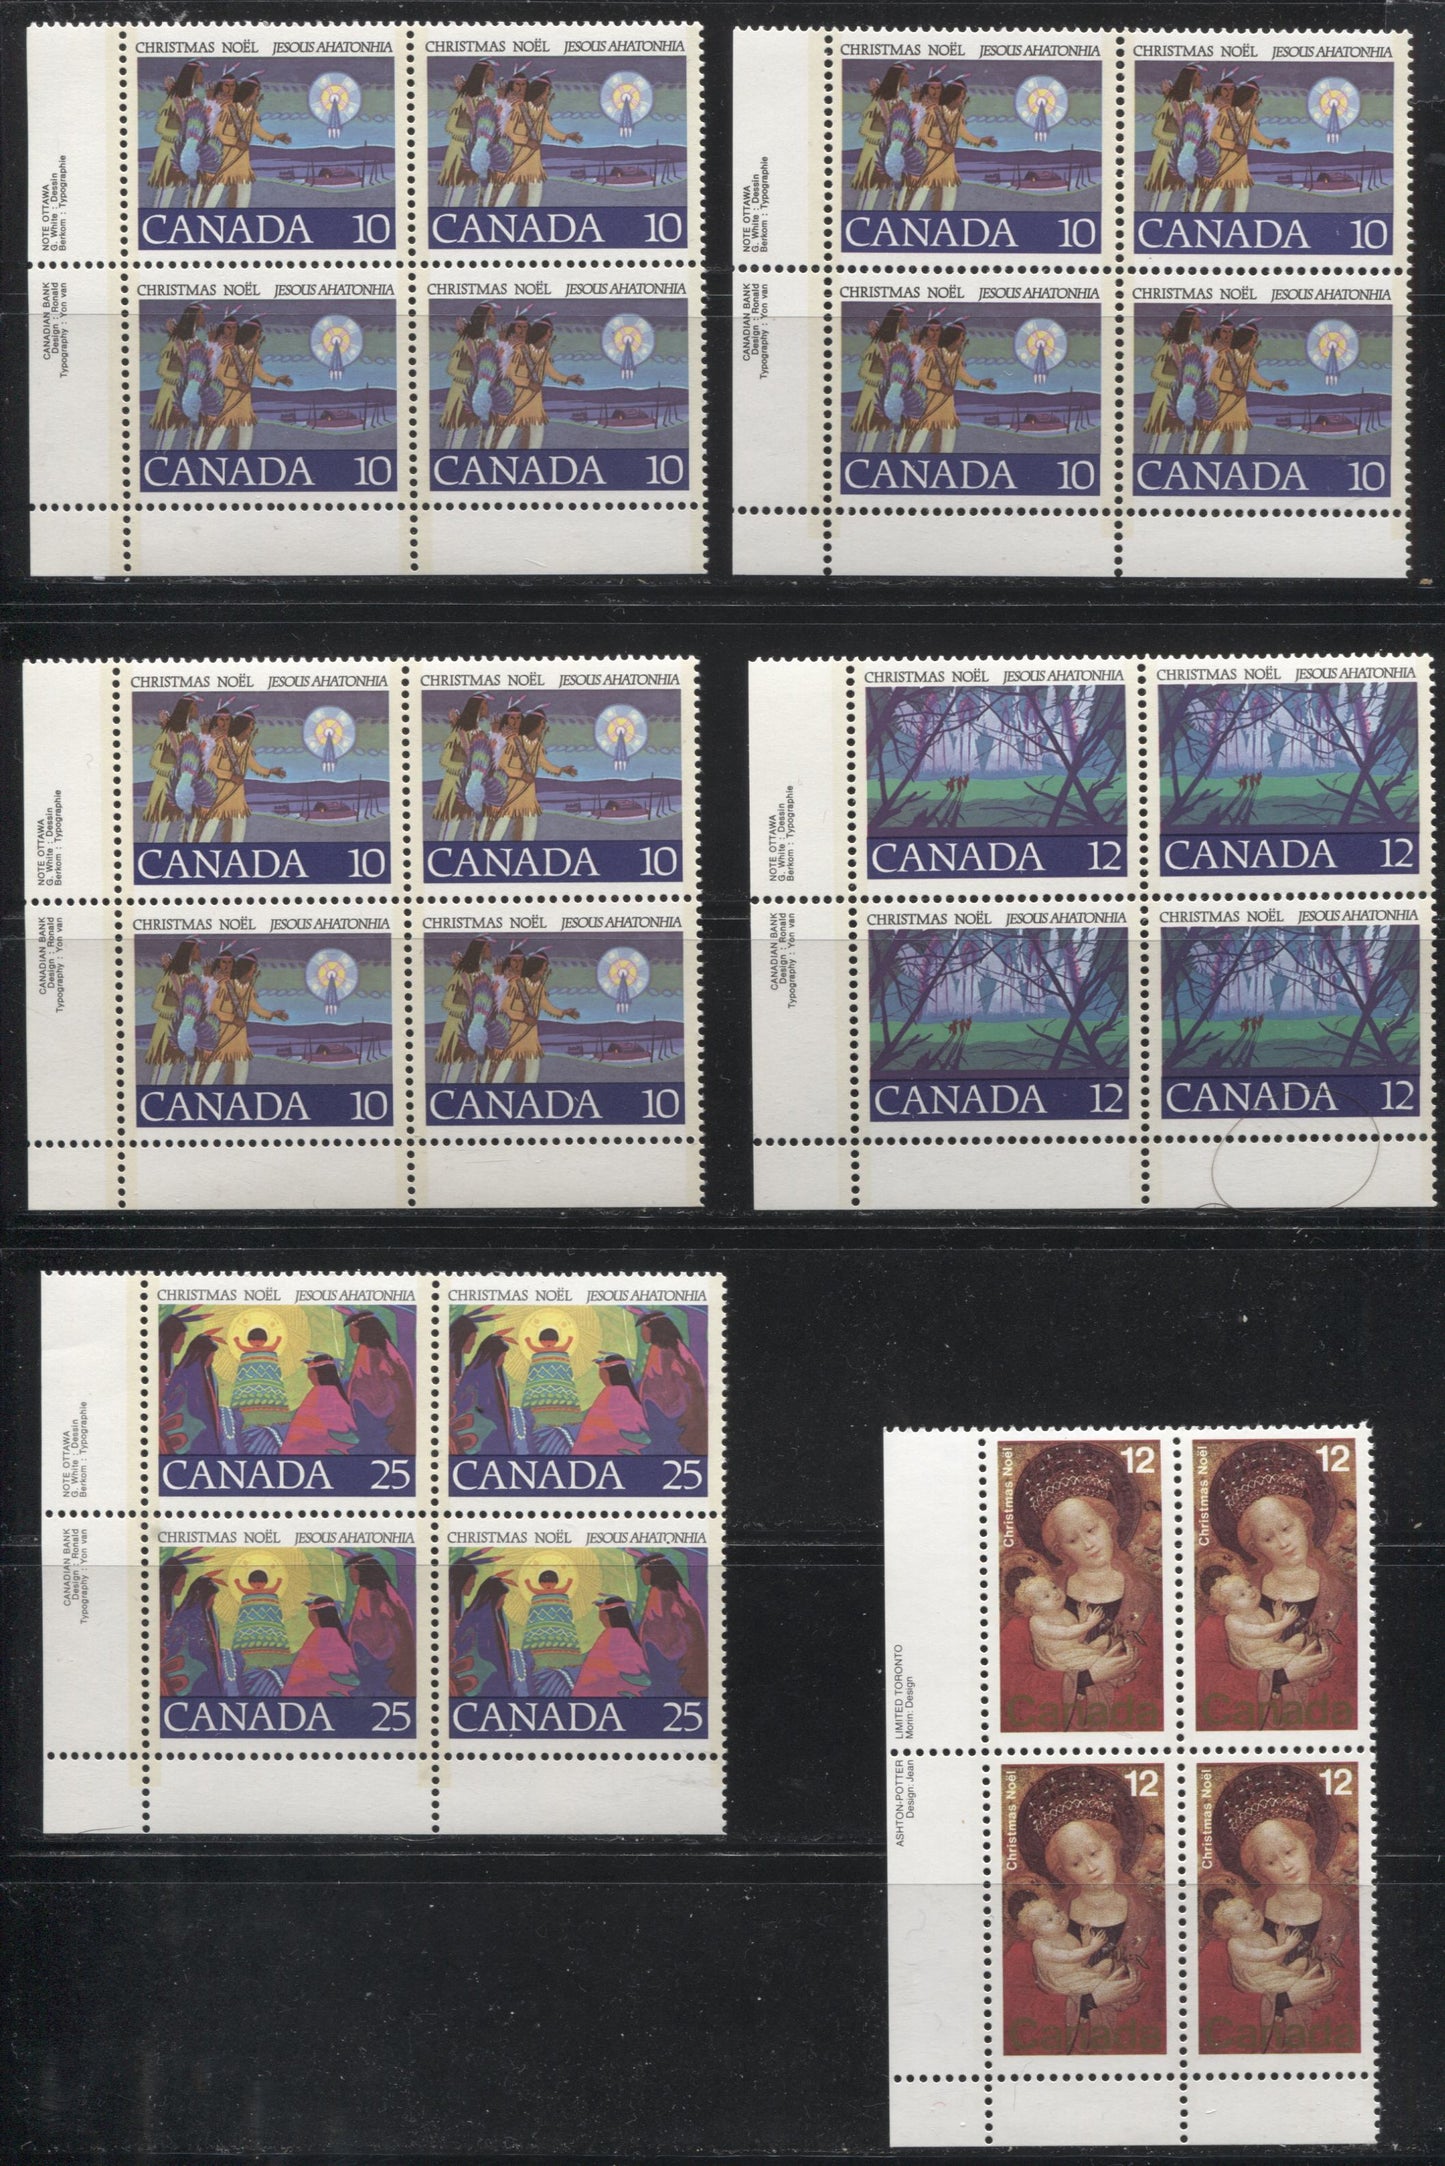 Lot 200 Canada #741/841 1977-1979 Christmas Issues - A Specialized Lot of 11 VFNH Lower Left Inscription Blocks, With Different Paper Types